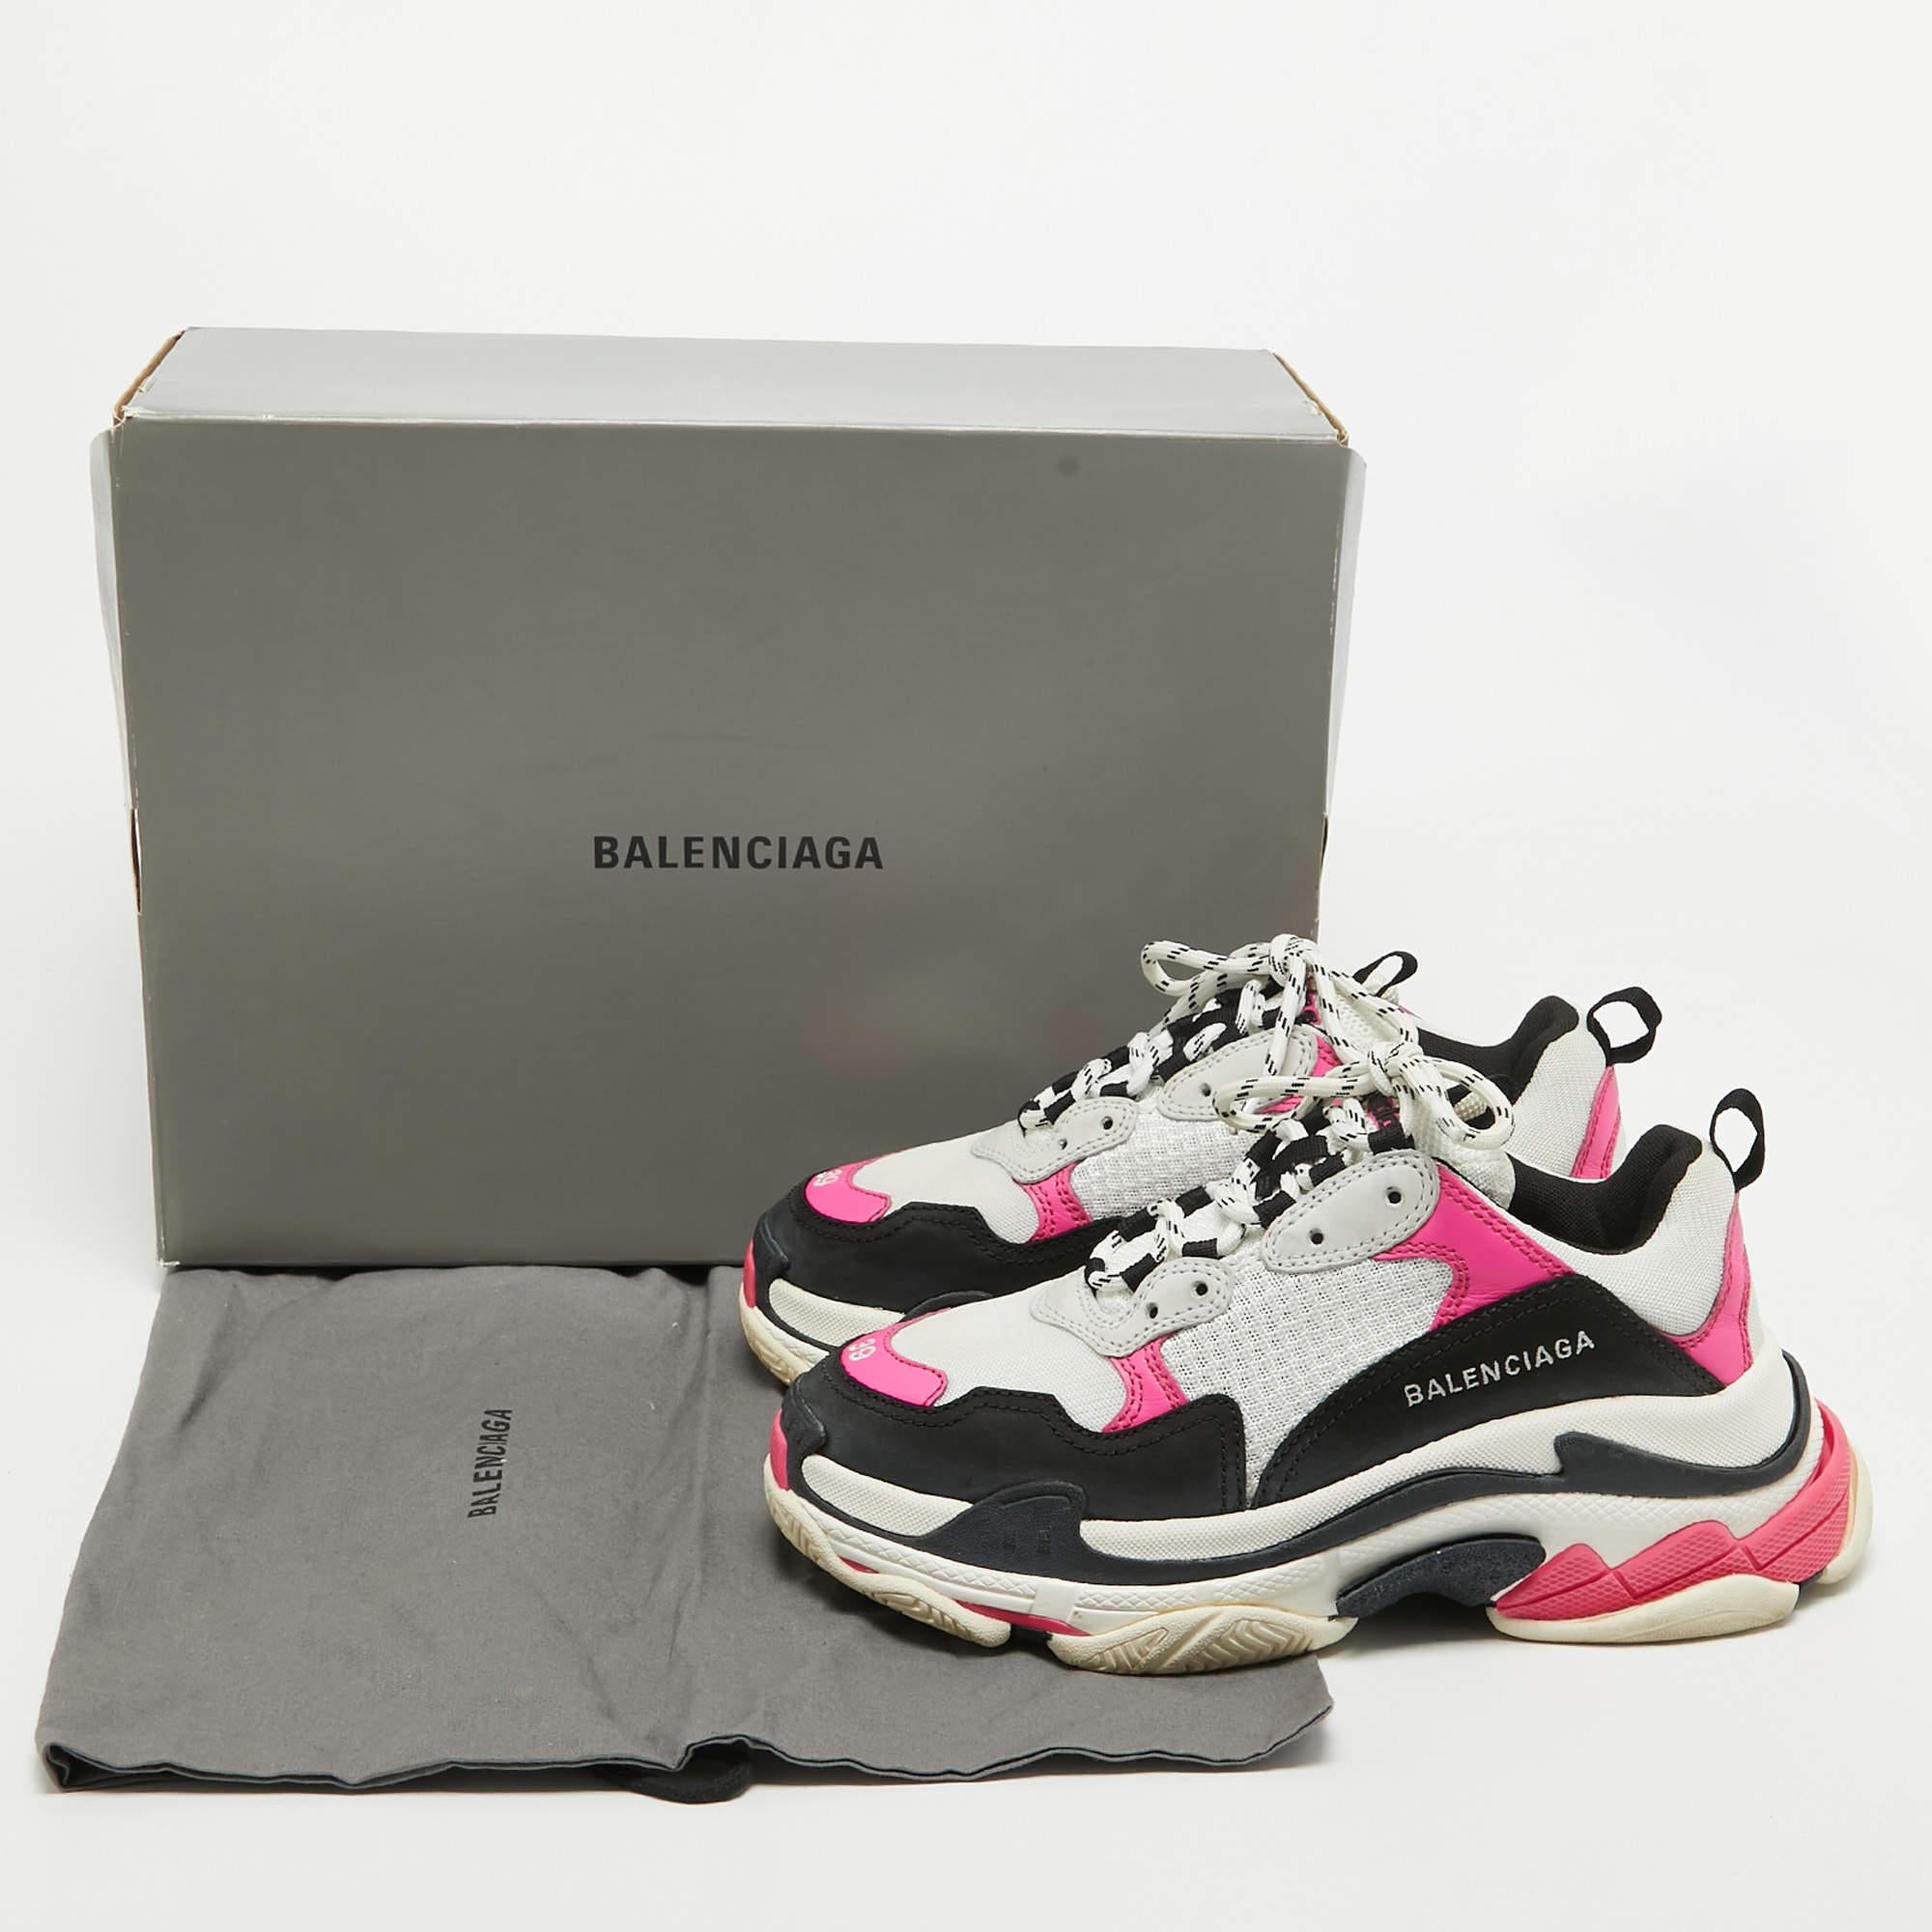 Balenciaga Multicolor Leather and Mesh Triple S Sneakers Size 39 For Sale 5